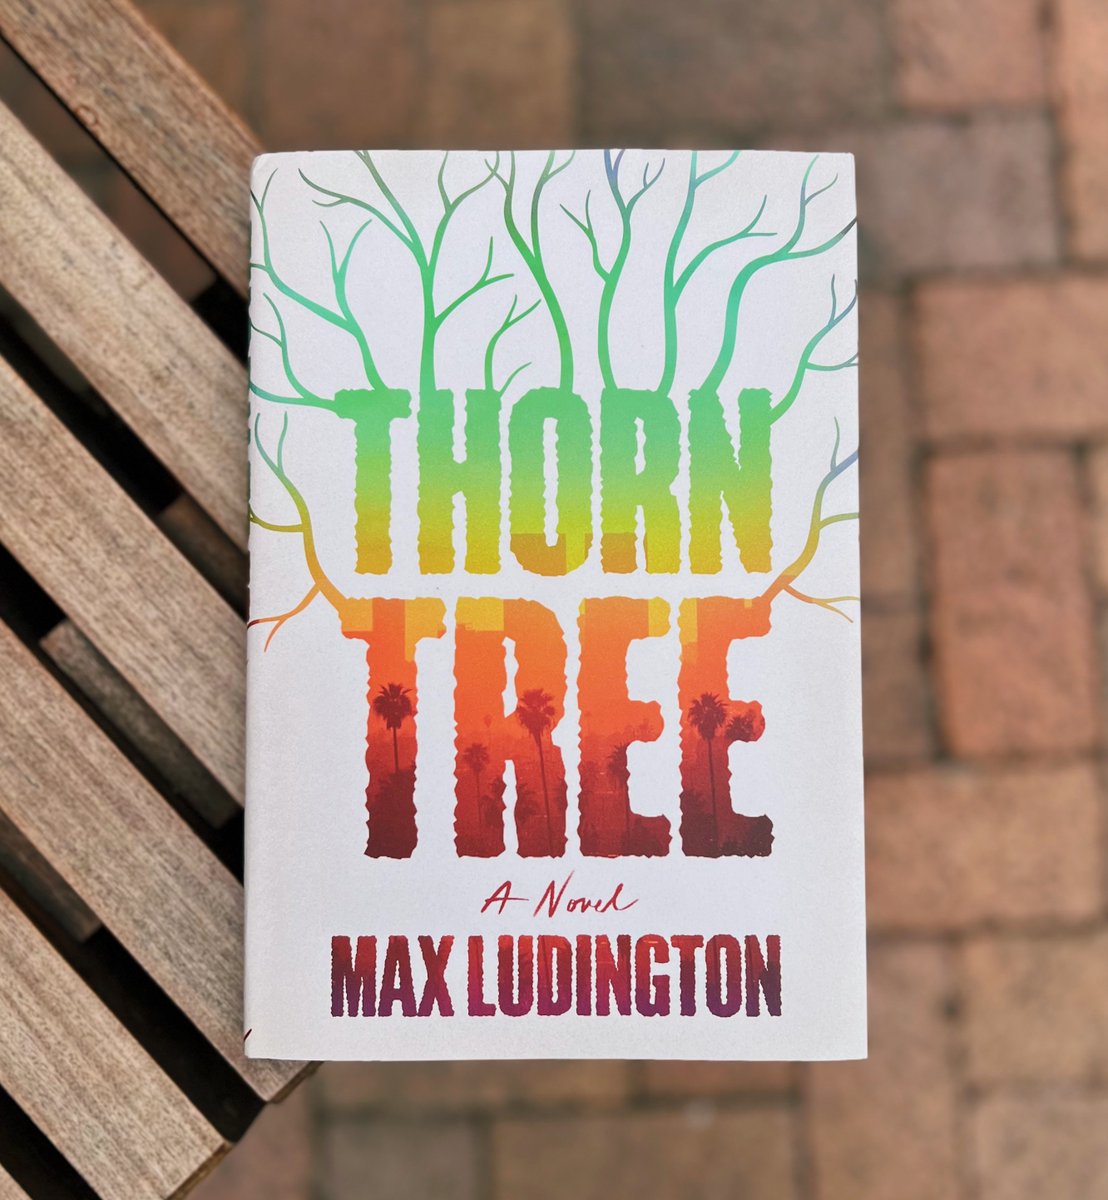 THORN TREE is out next Tuesday! This beautifully wrought novel is, 'a riotous, tragic, sublimely written rampage through the lingering dregs of 1960’s cults and crimes.' -Jennifer Egan, author of A Visit from the Goon Squad Learn more: read.macmillan.com/lp/thorn-tree/